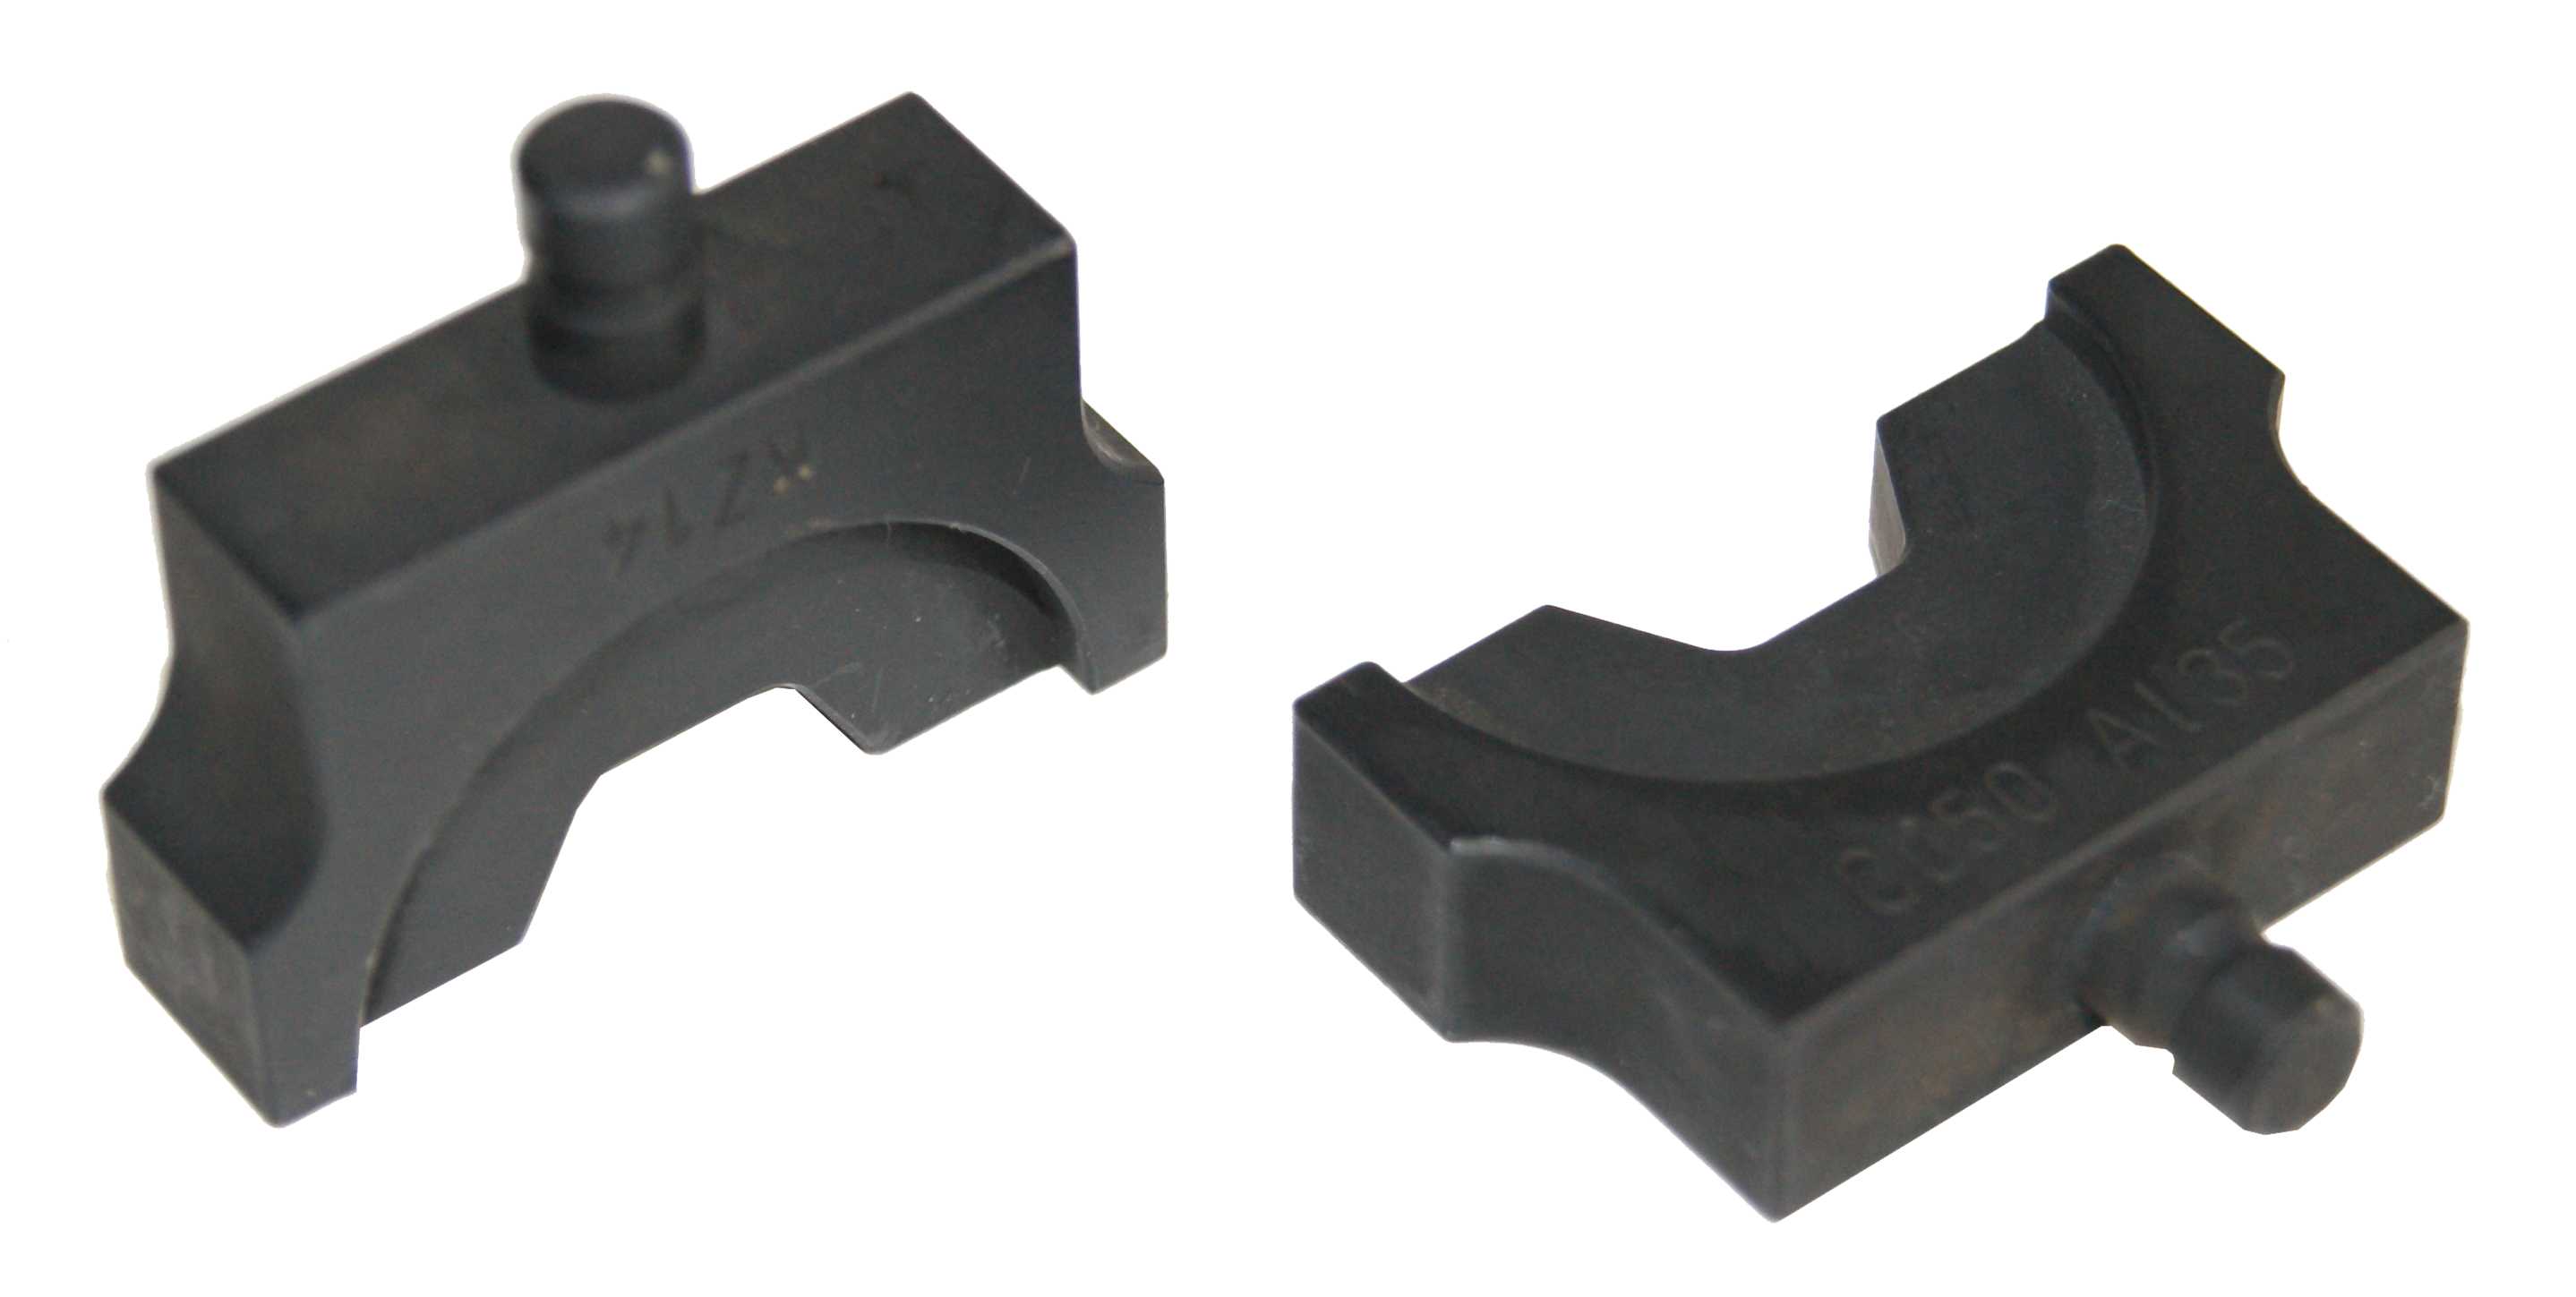 PDI-35: Mandrel crimping insert for insulated crimp terminals and insulated pin terminals, "35" series